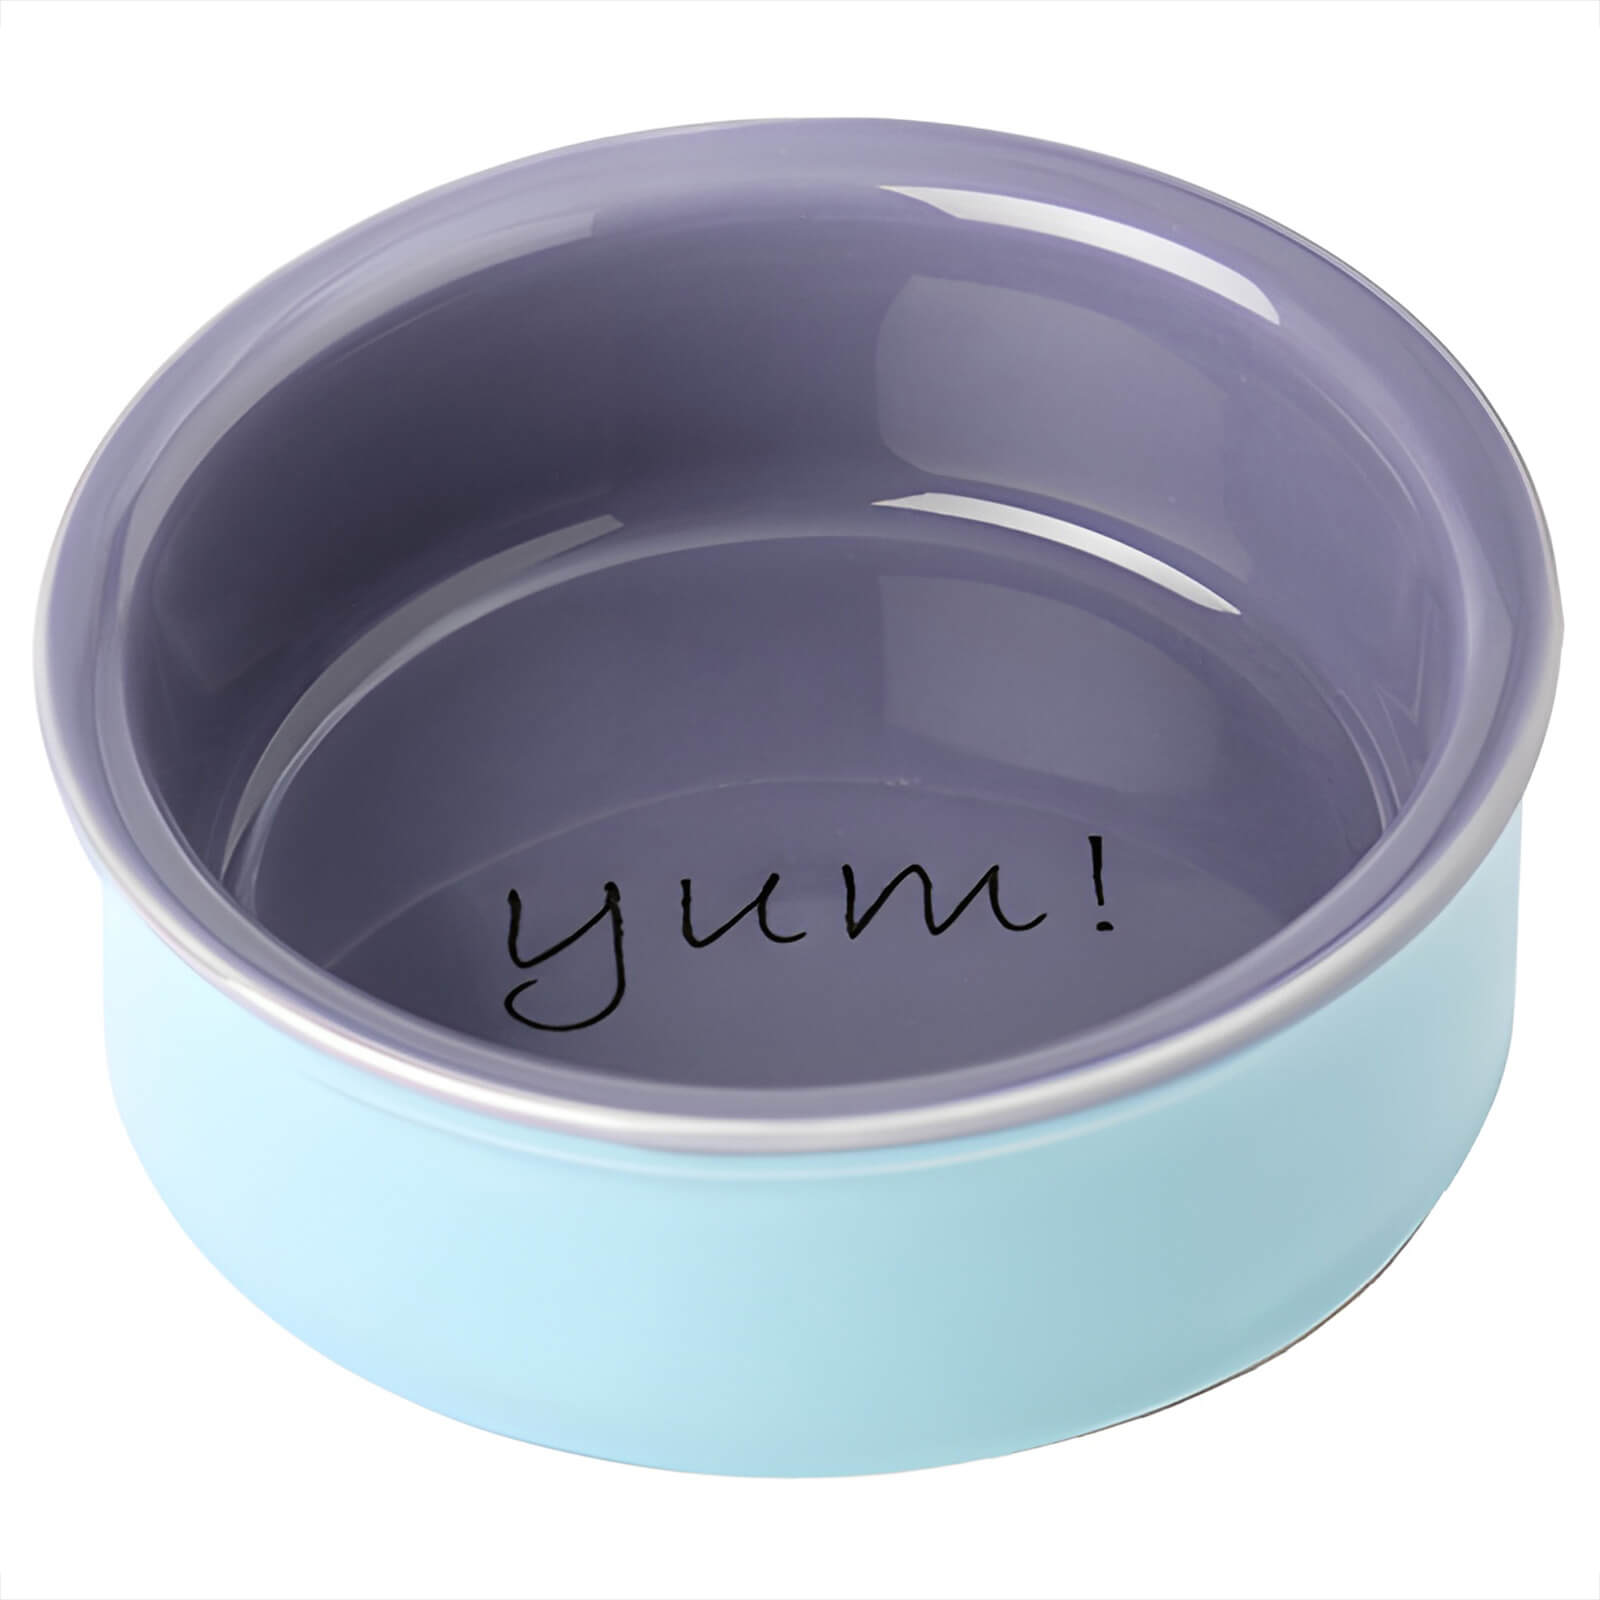 Small Yummy Time pellet or food bowl for guinea pigs in blue and purple.